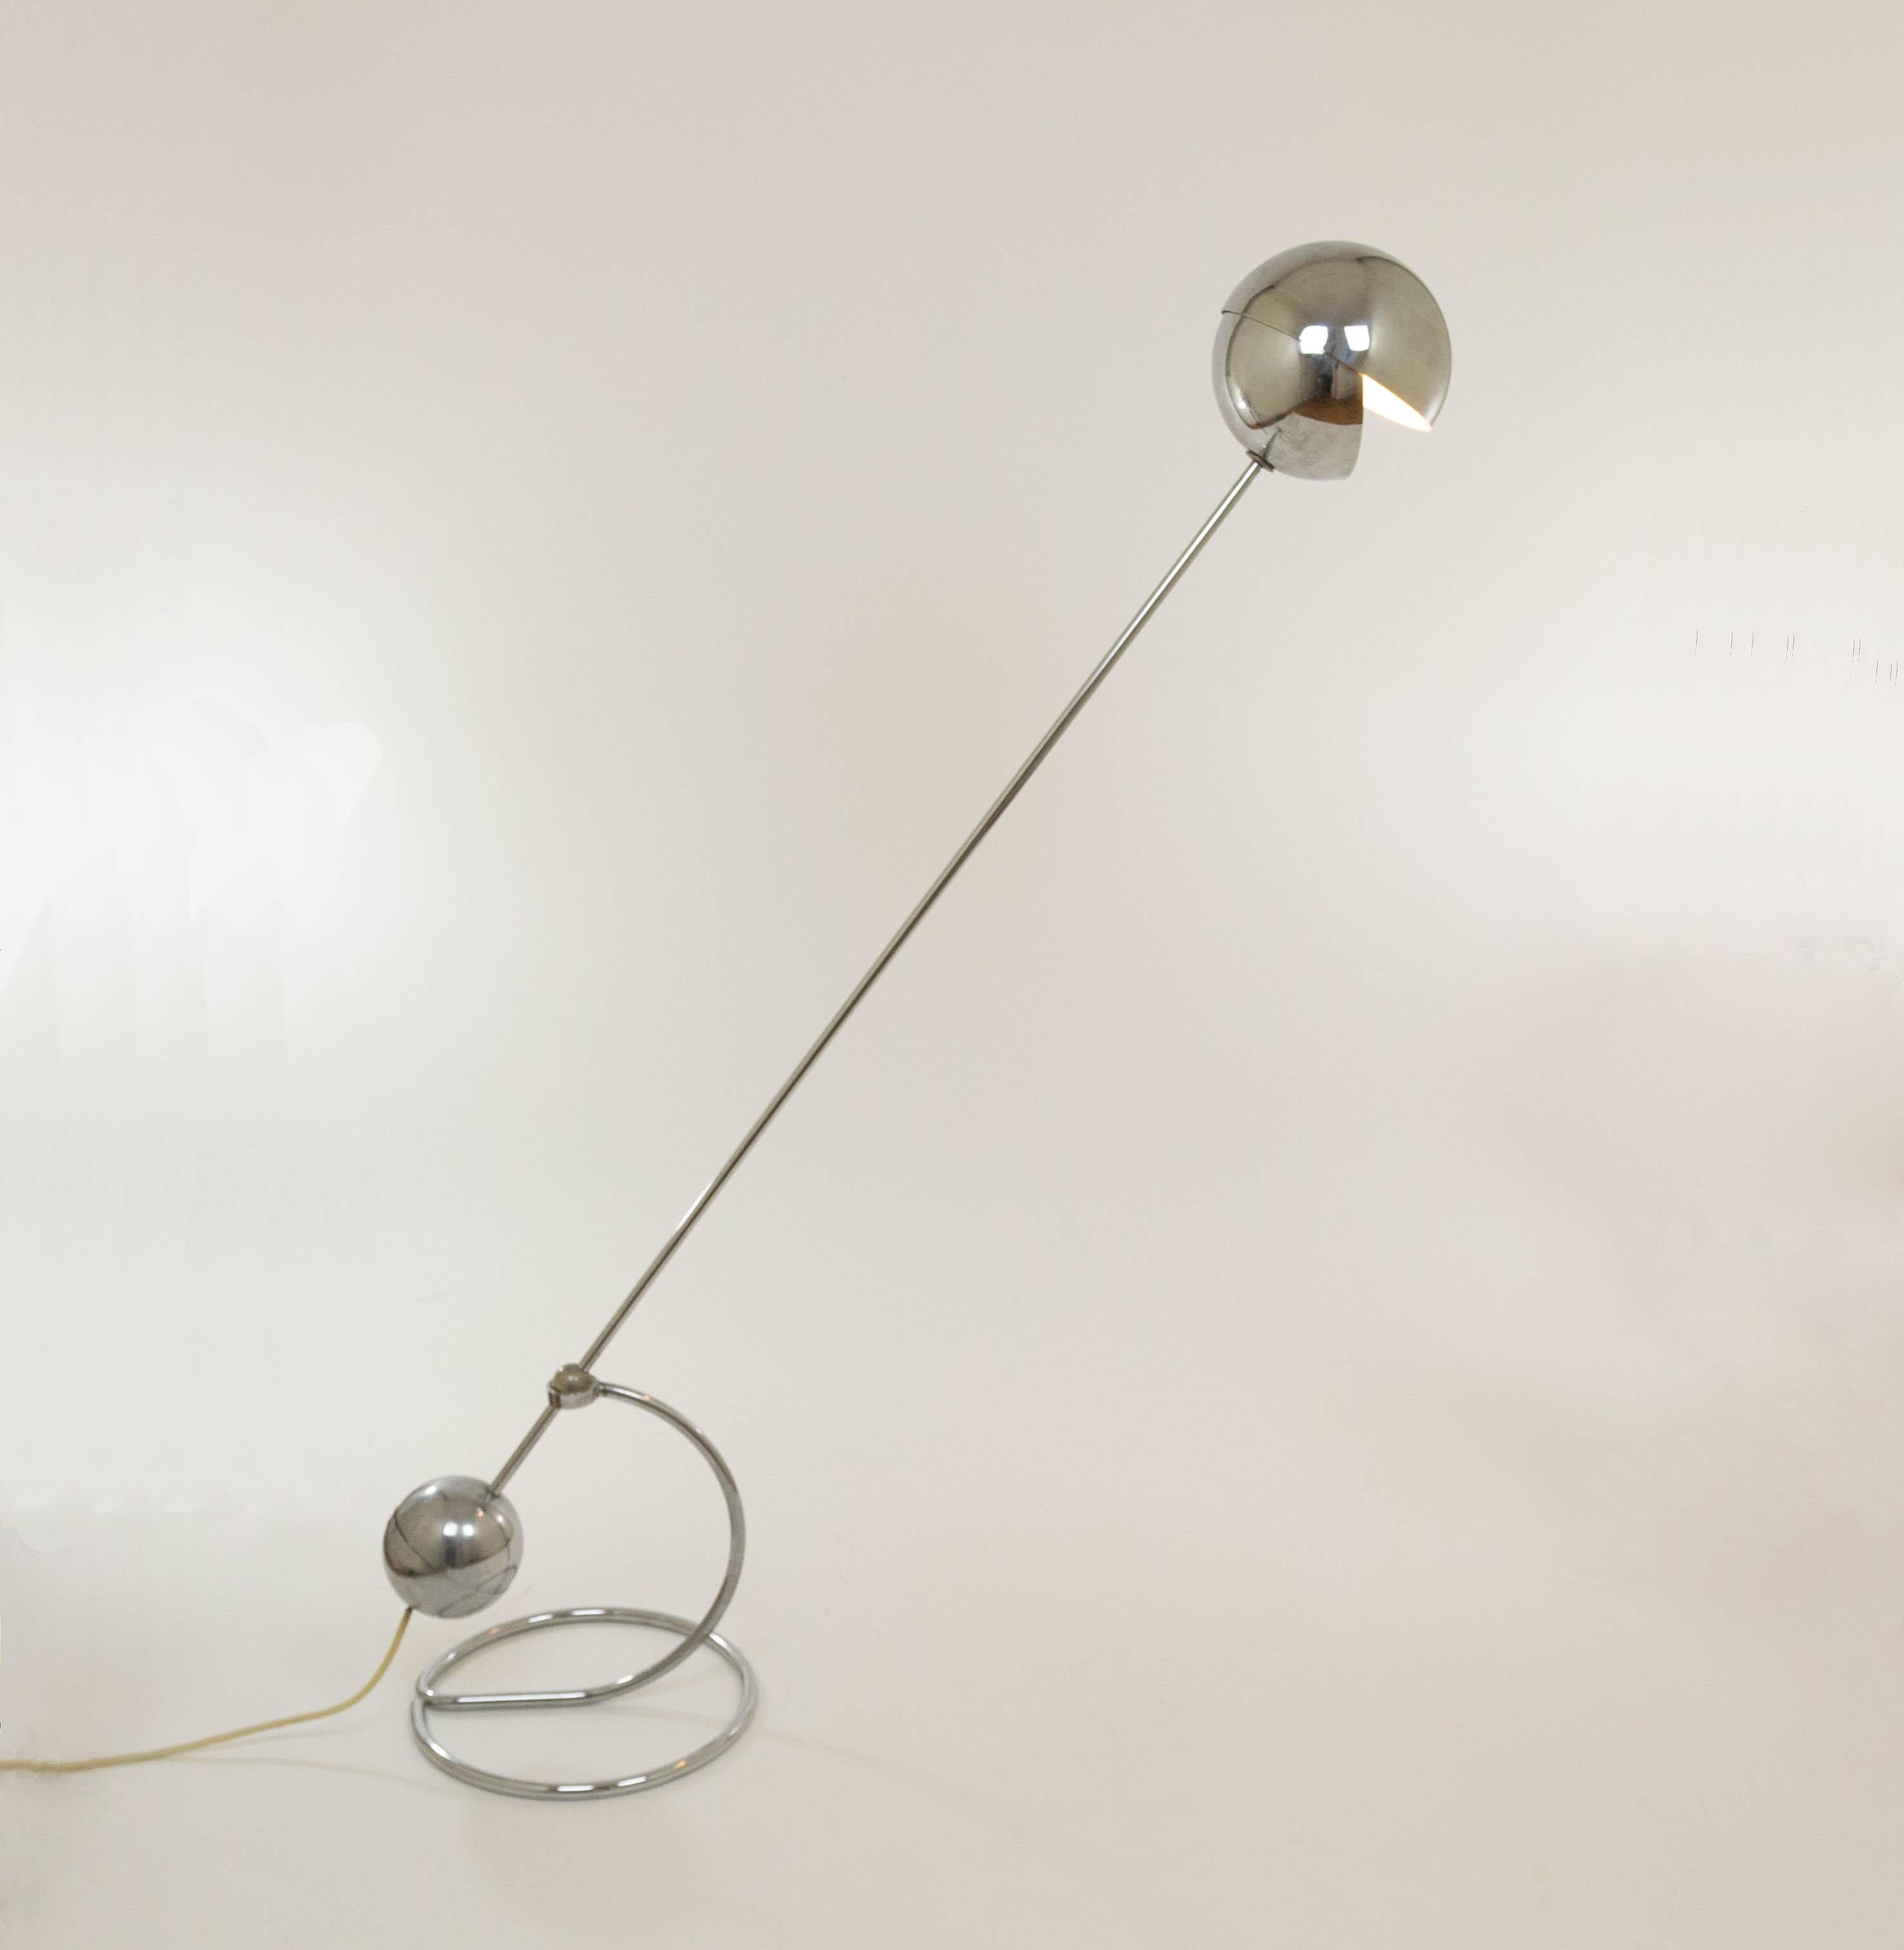 Flexible model 3S floor lamp designed by Paolo Tilche in 1961 and produced by Sirrah.

The lamp has a spherical shade and a rather heavy, also, spherical base that serves as a counterweight. The 3S floor lamp is adjustable around the vertical